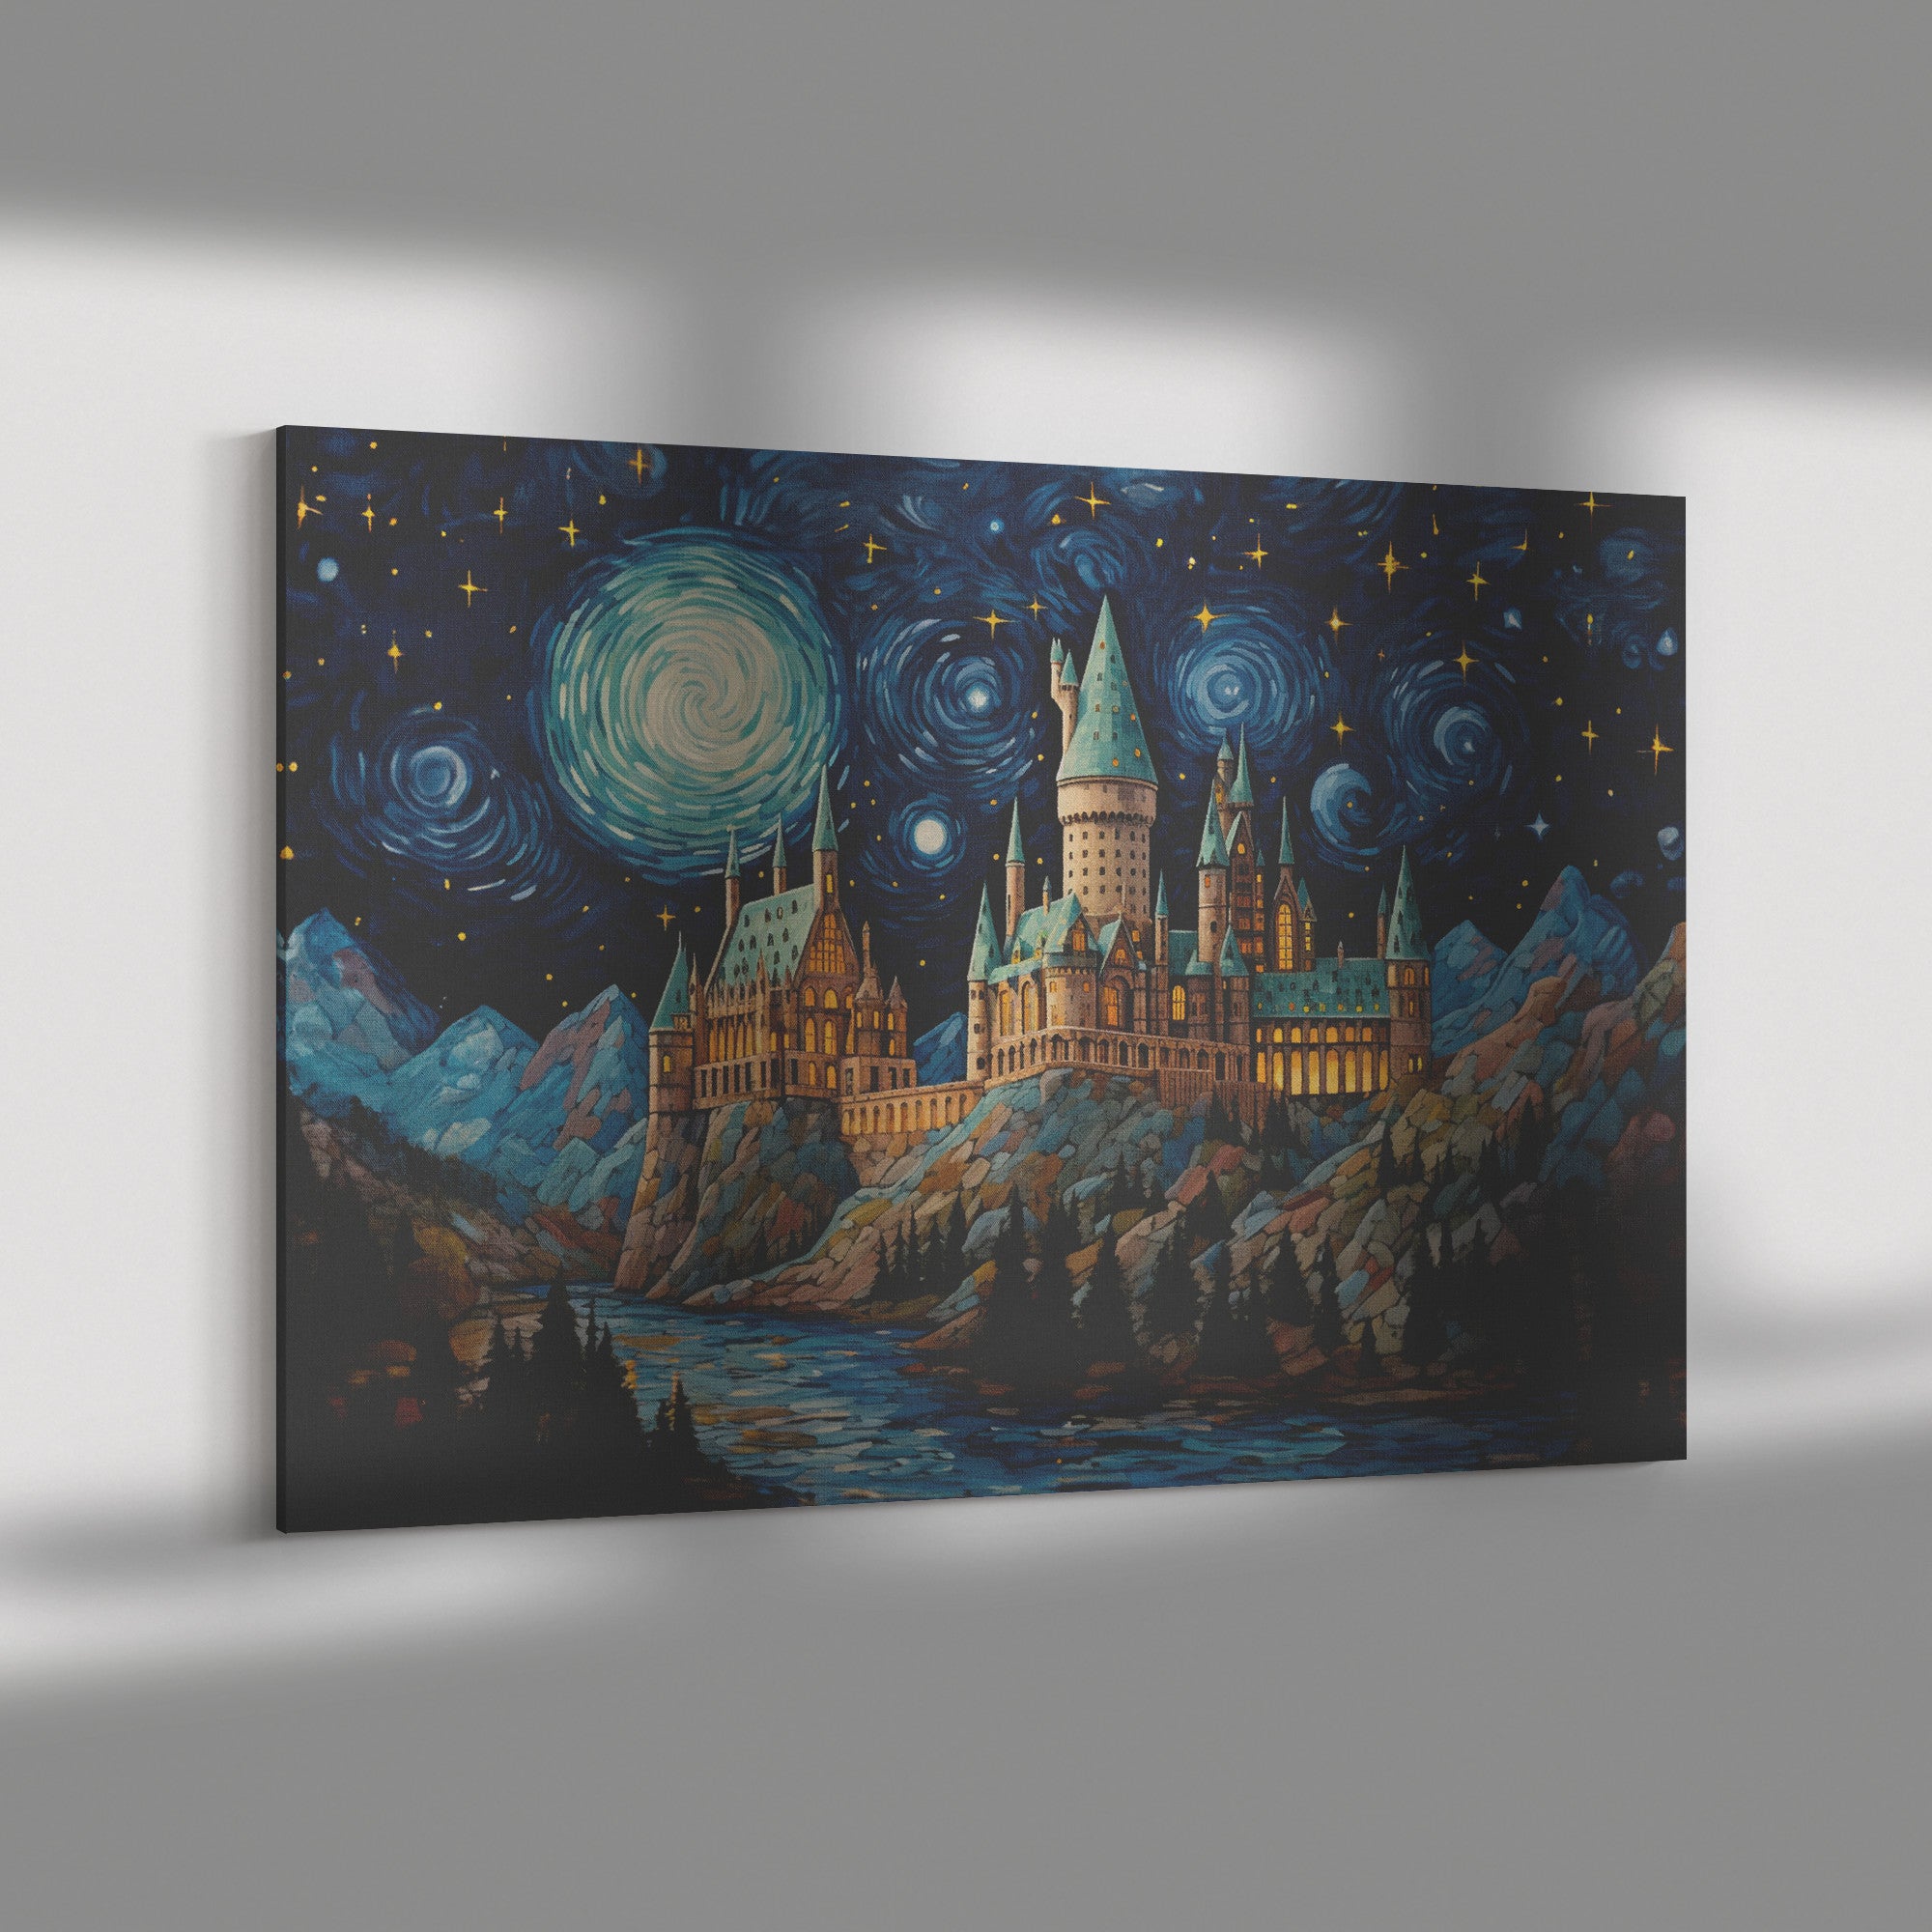 The Castle Starry Night Canvas Print